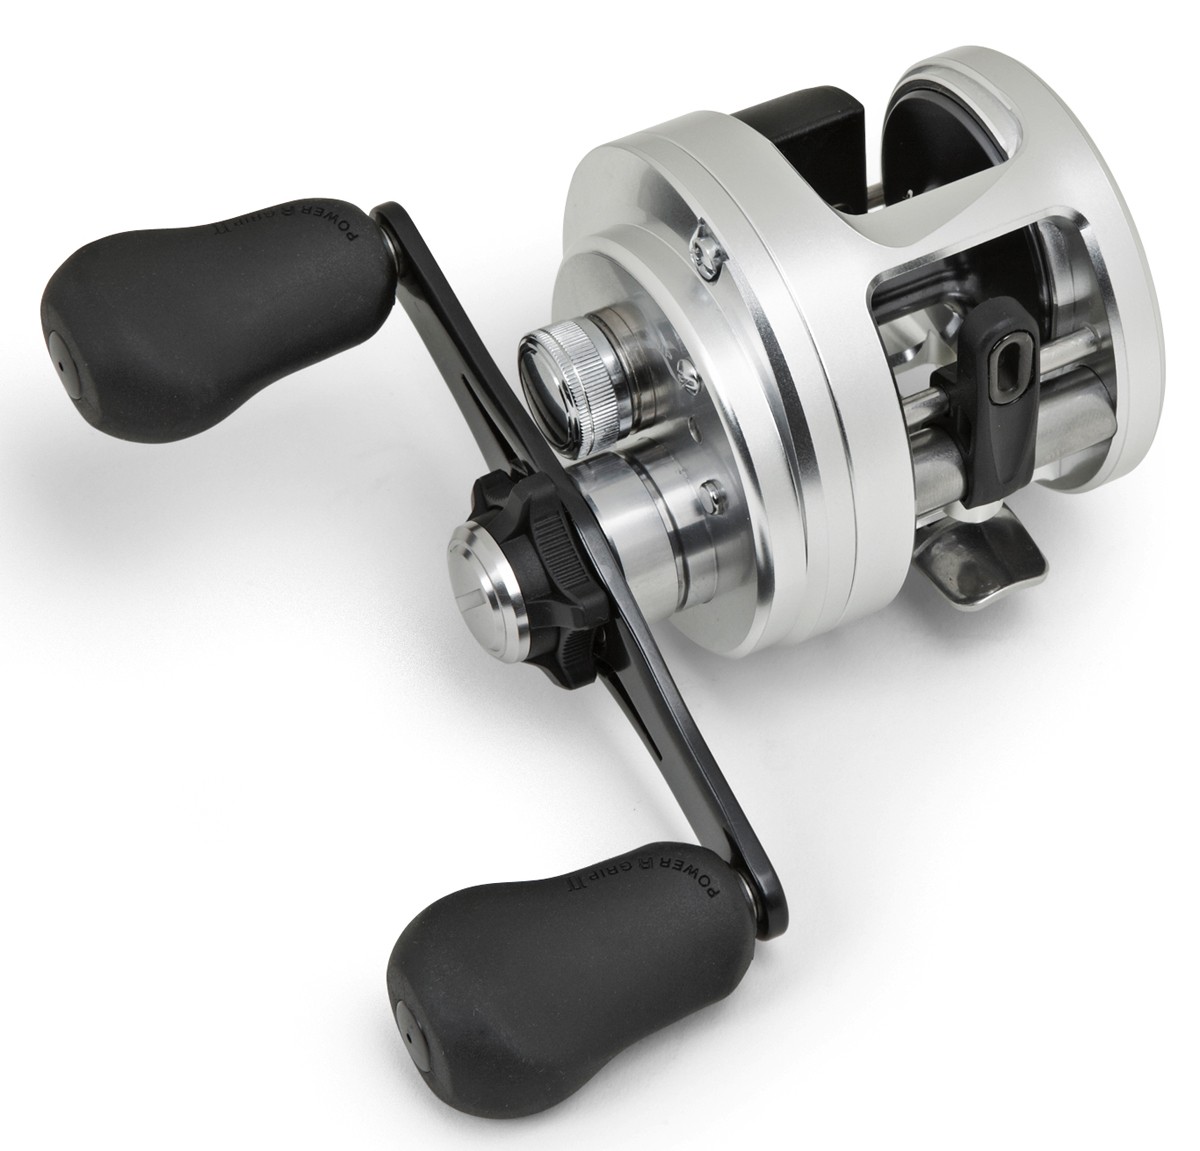 Shimano reel for deep cranking - Fishing Rods, Reels, Line, and Knots - Bass  Fishing Forums